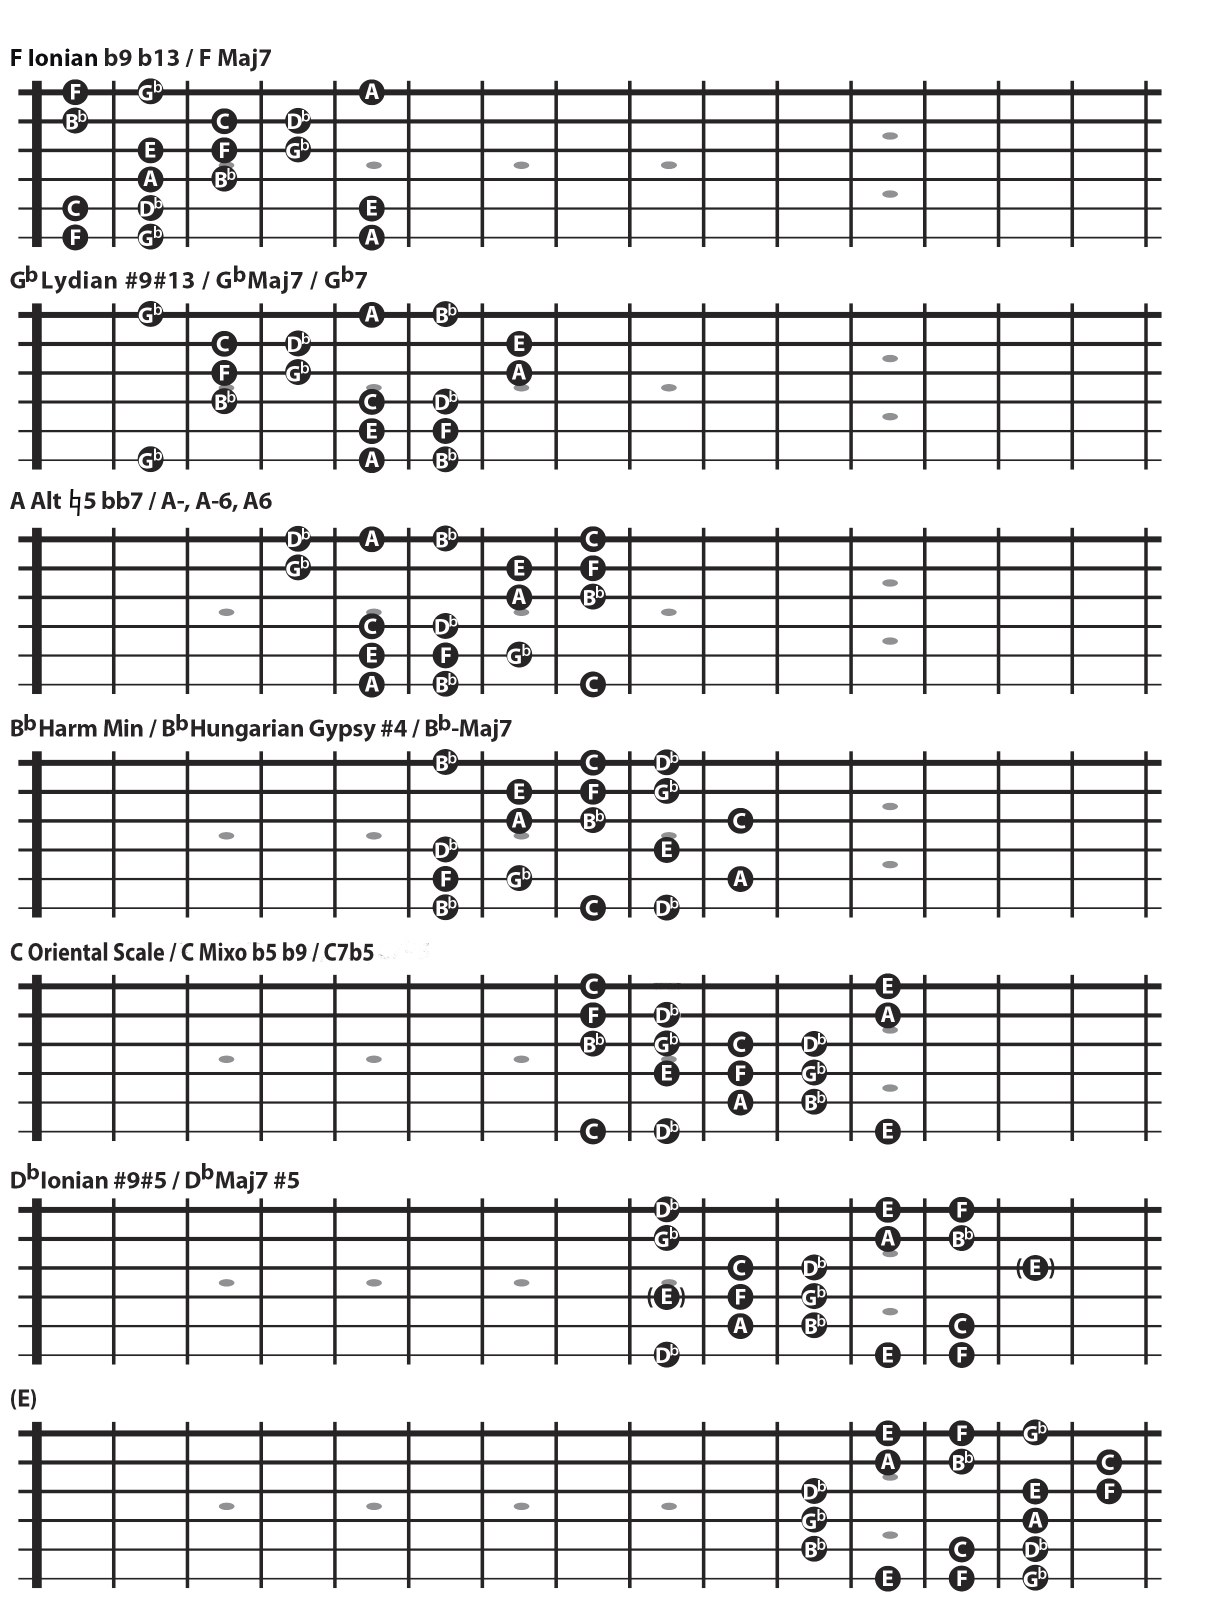 All in-position fingerings of the C Oriental scale